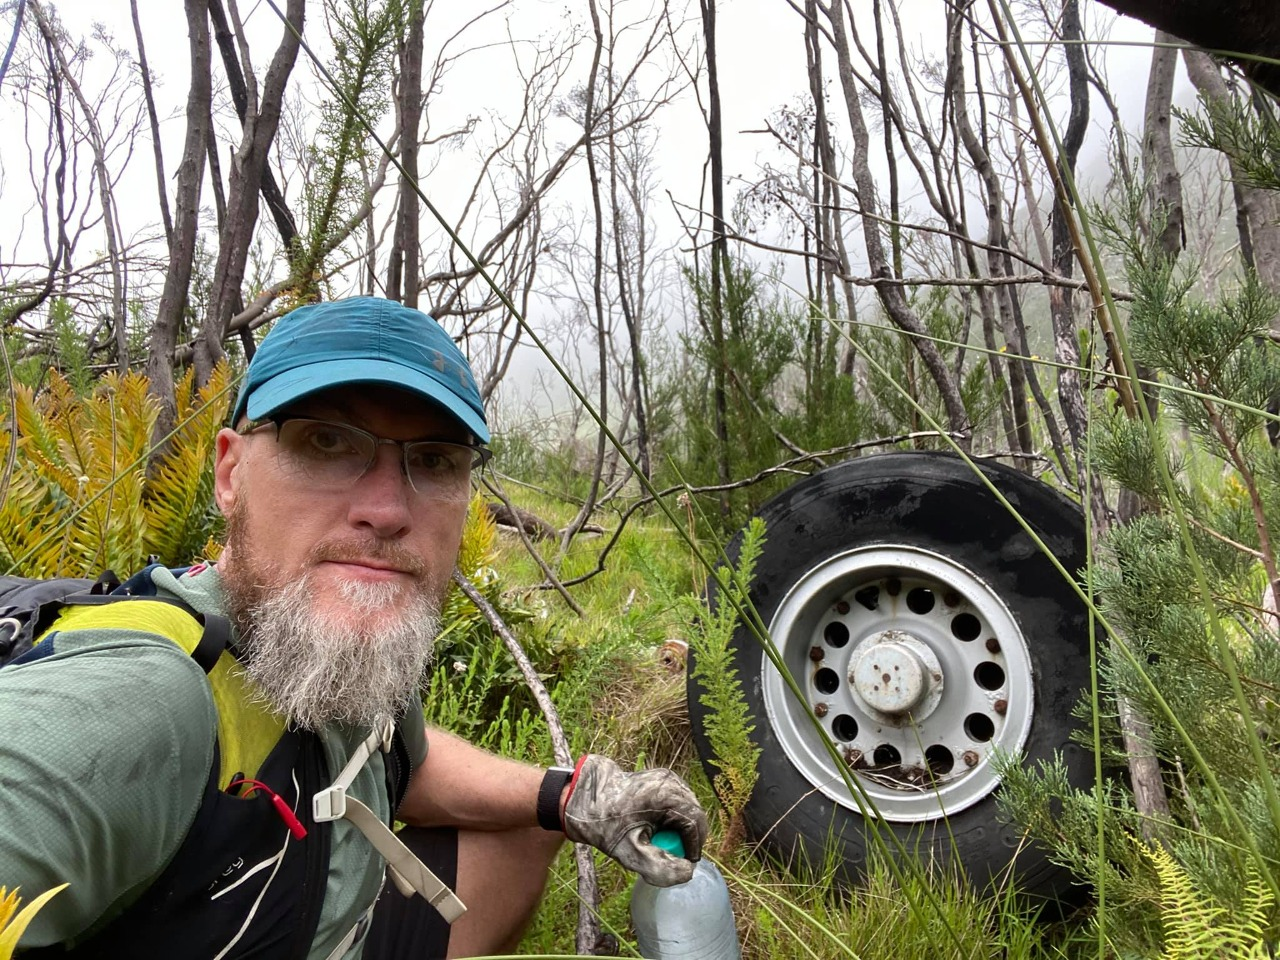 Hiker explores 2002 crash site which killed Hansie and two pilots